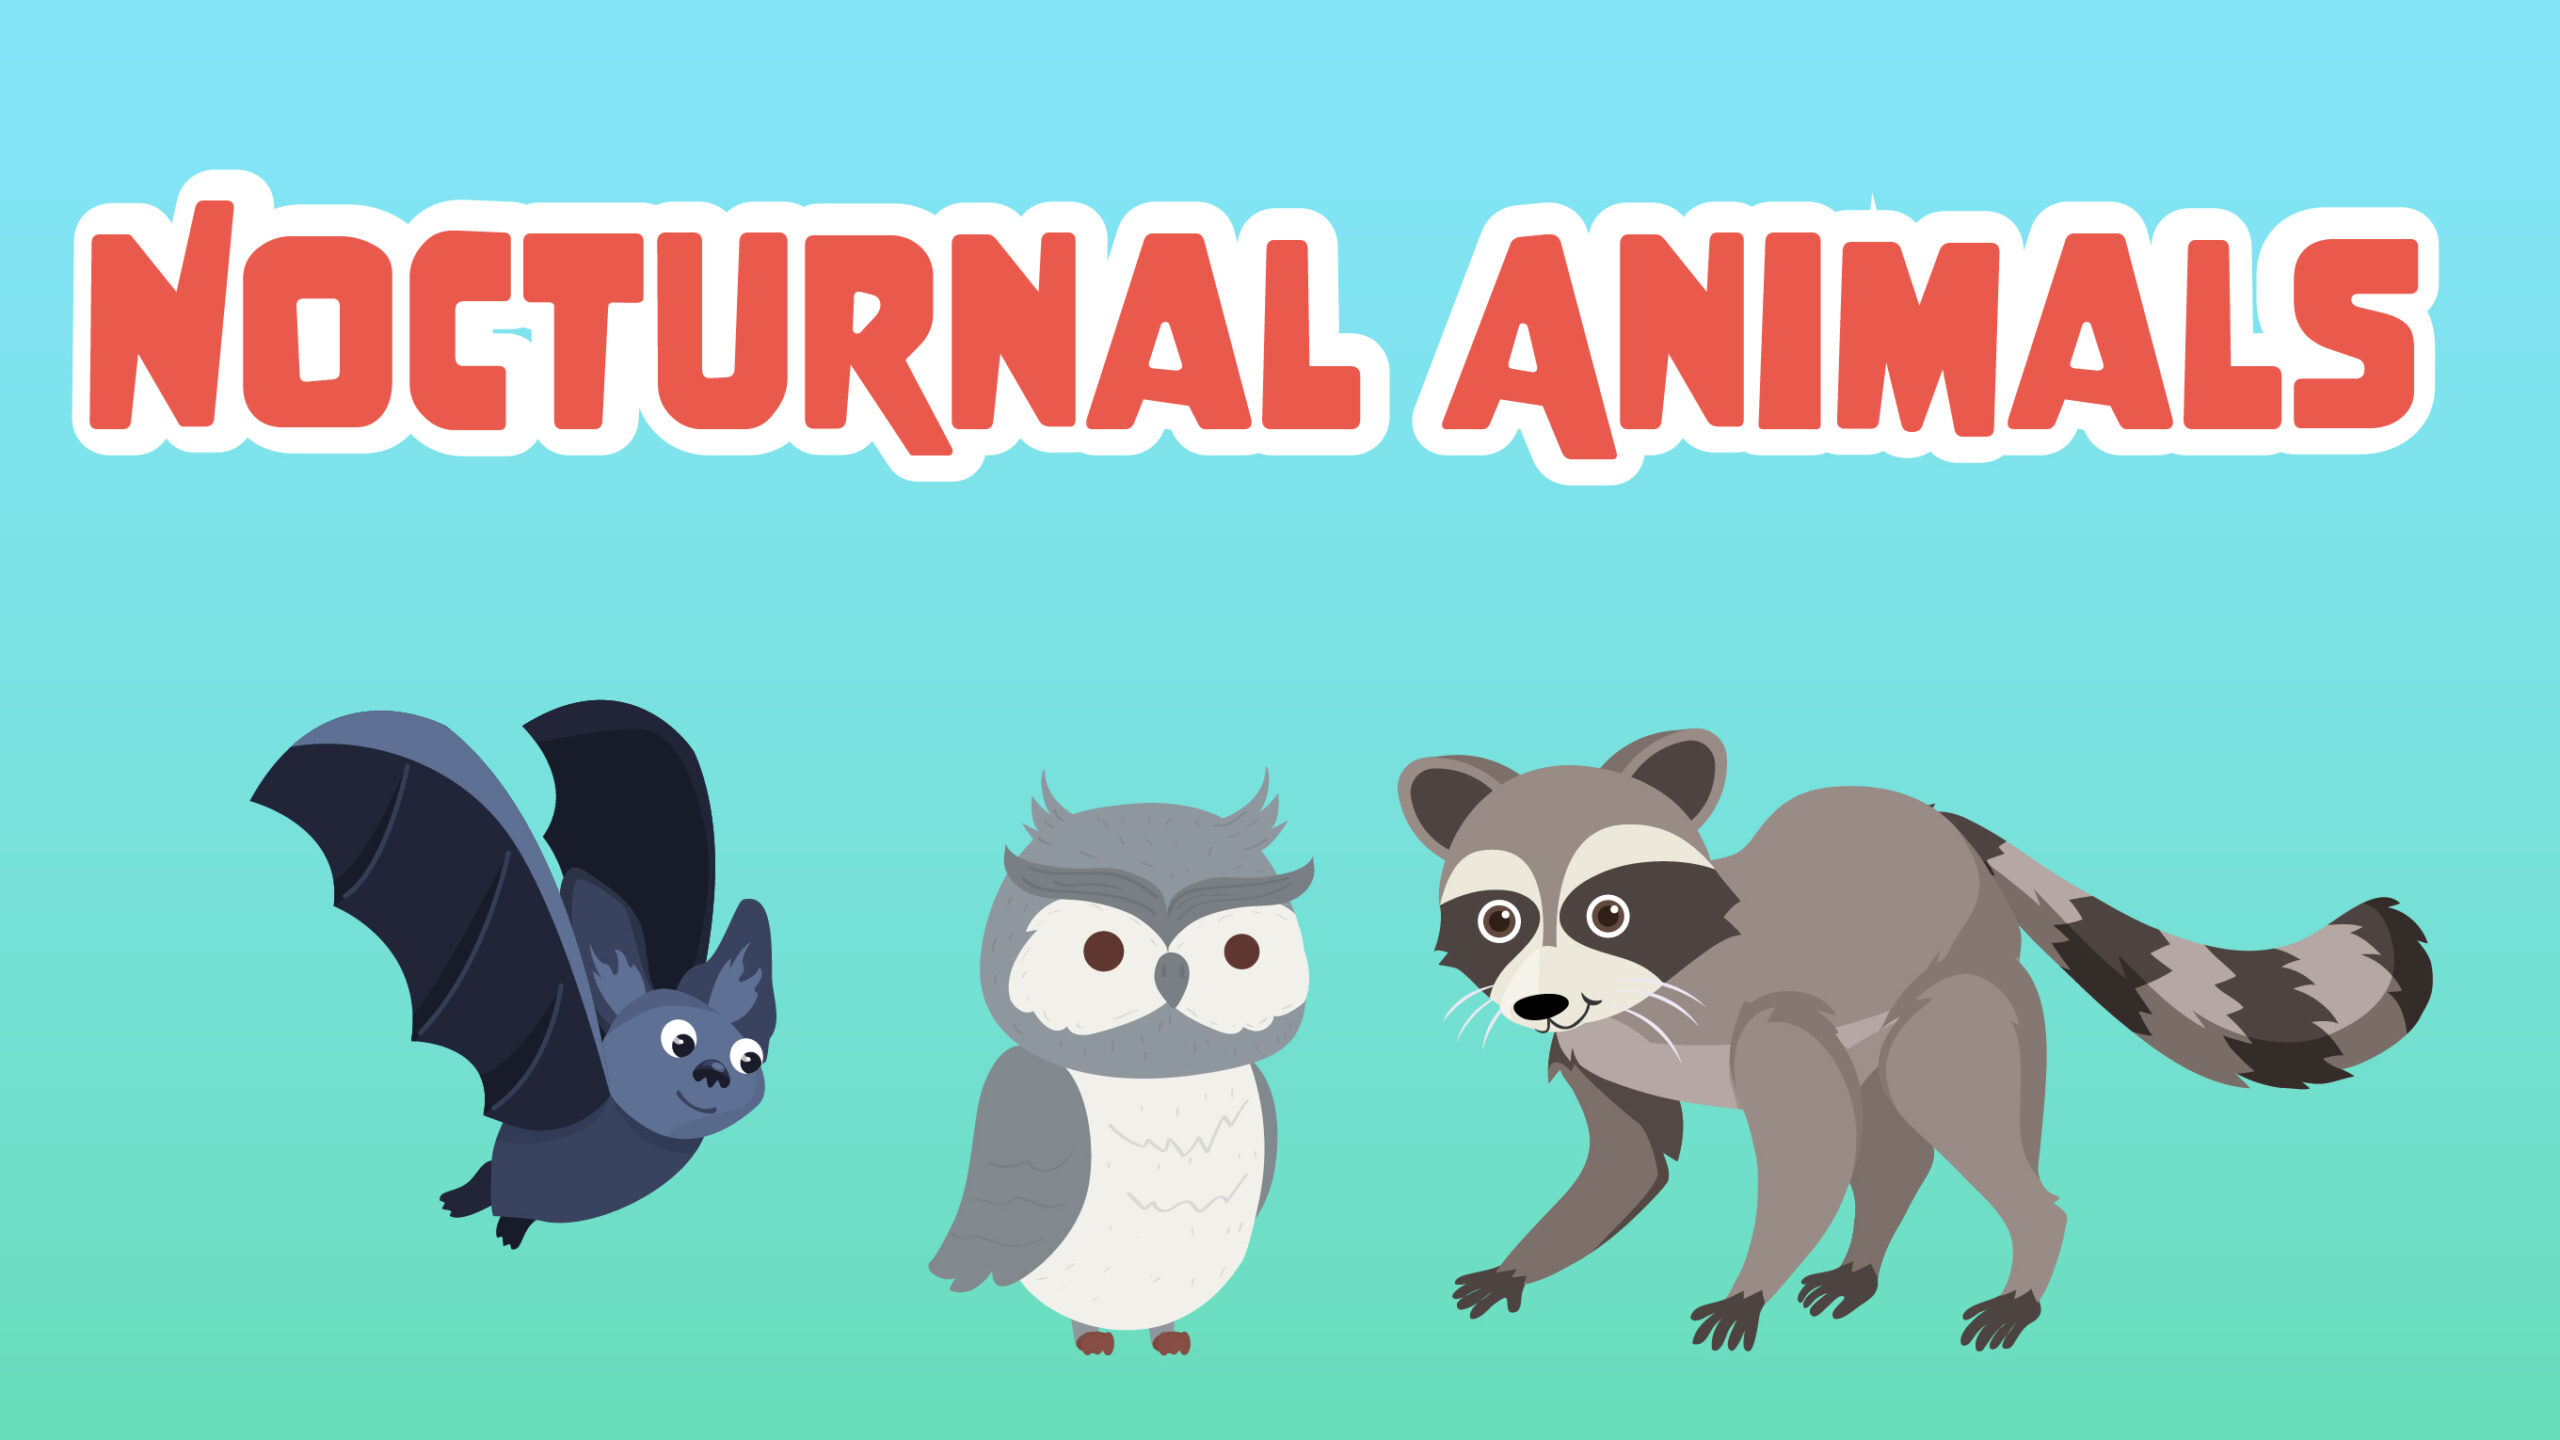 Nocturnal Animals Facts for Kids – 5 Amazing Facts about Nocturnal Animals